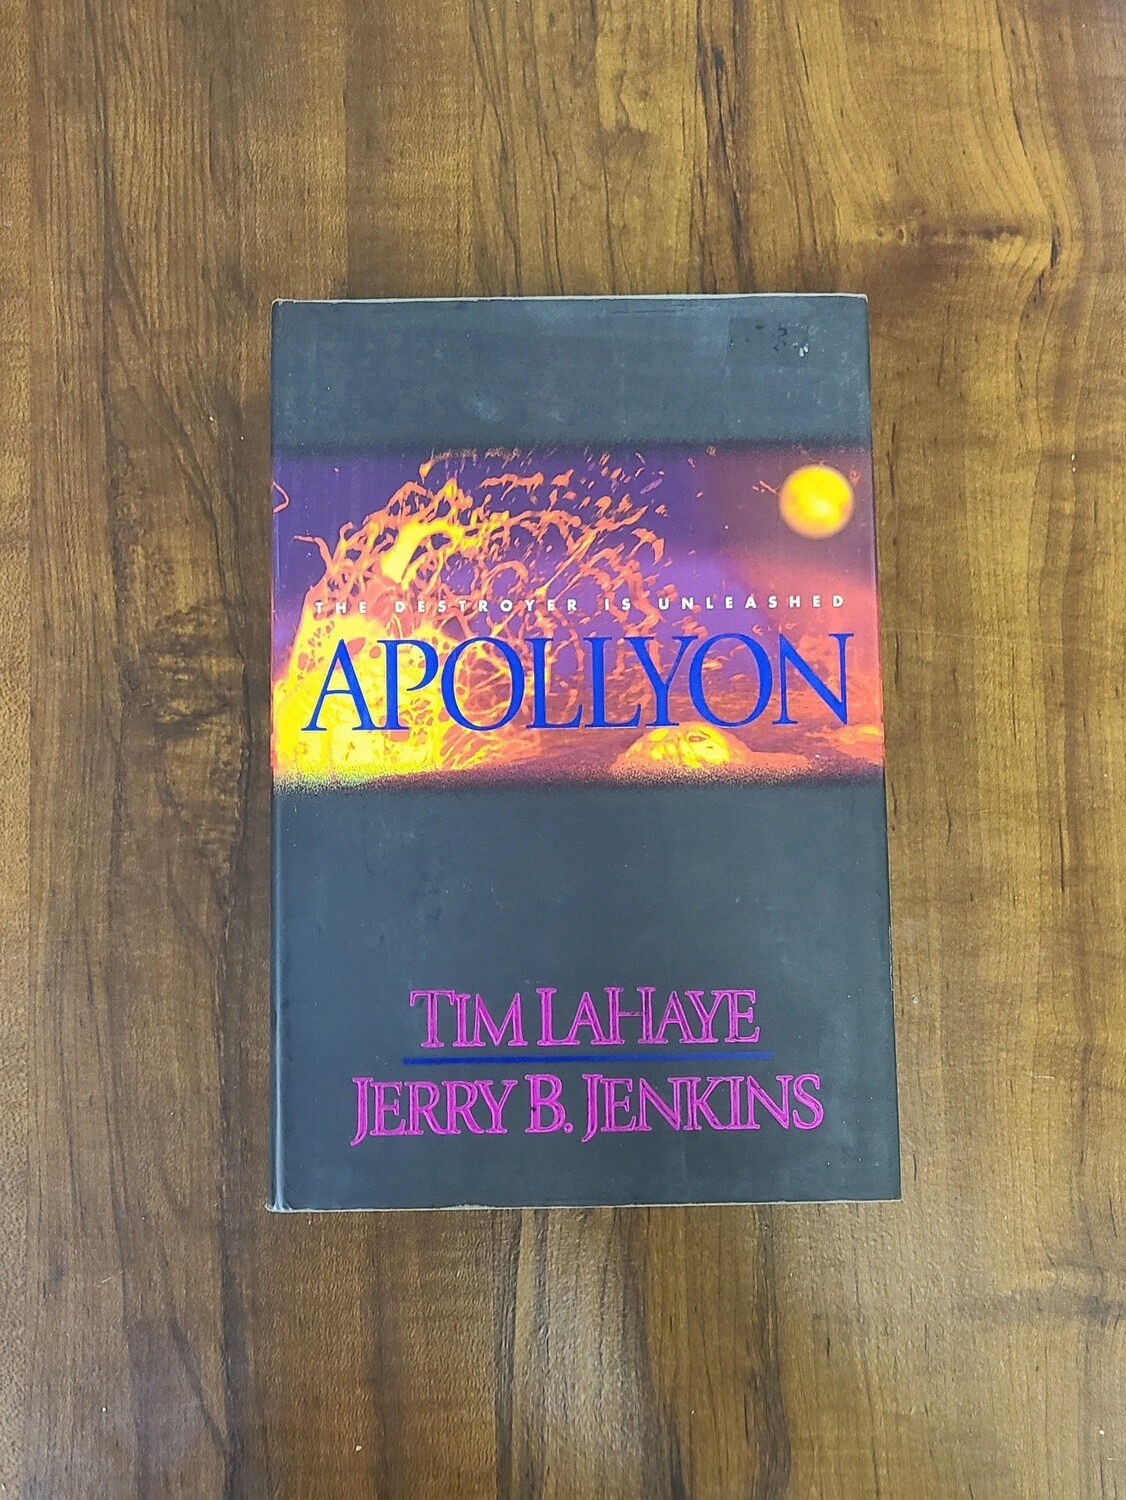 Apollyon: The Destroyer is Unleashed by Tim LaHaye and Jerry B. Jenkins - Hardback